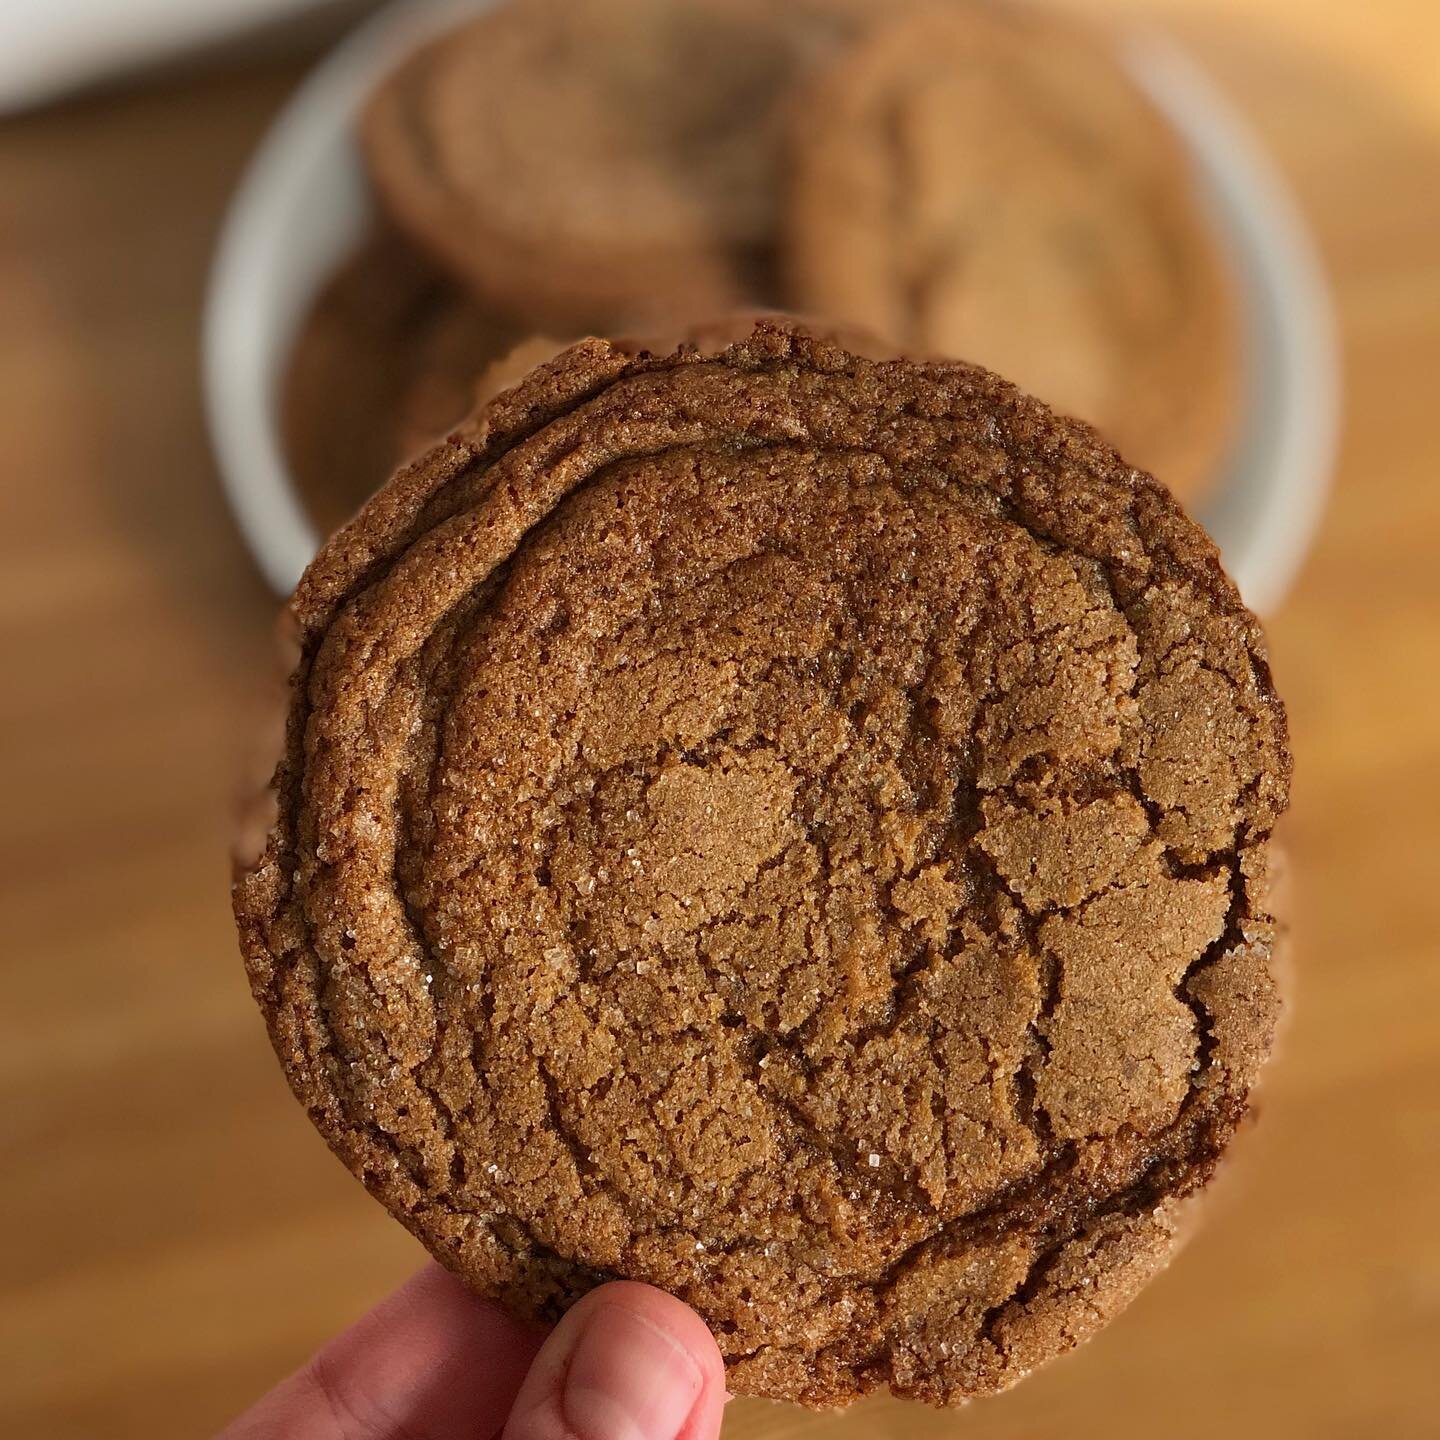 Spiced brown sugar cookies! Some of y&rsquo;all bought mixes to make your own earlier this summer - you can still do that, or skip to the end and buy a stack of baked cookies instead! DM for details 😘

#edinburgh #baking #sukibakes #eatlocal #shopsm